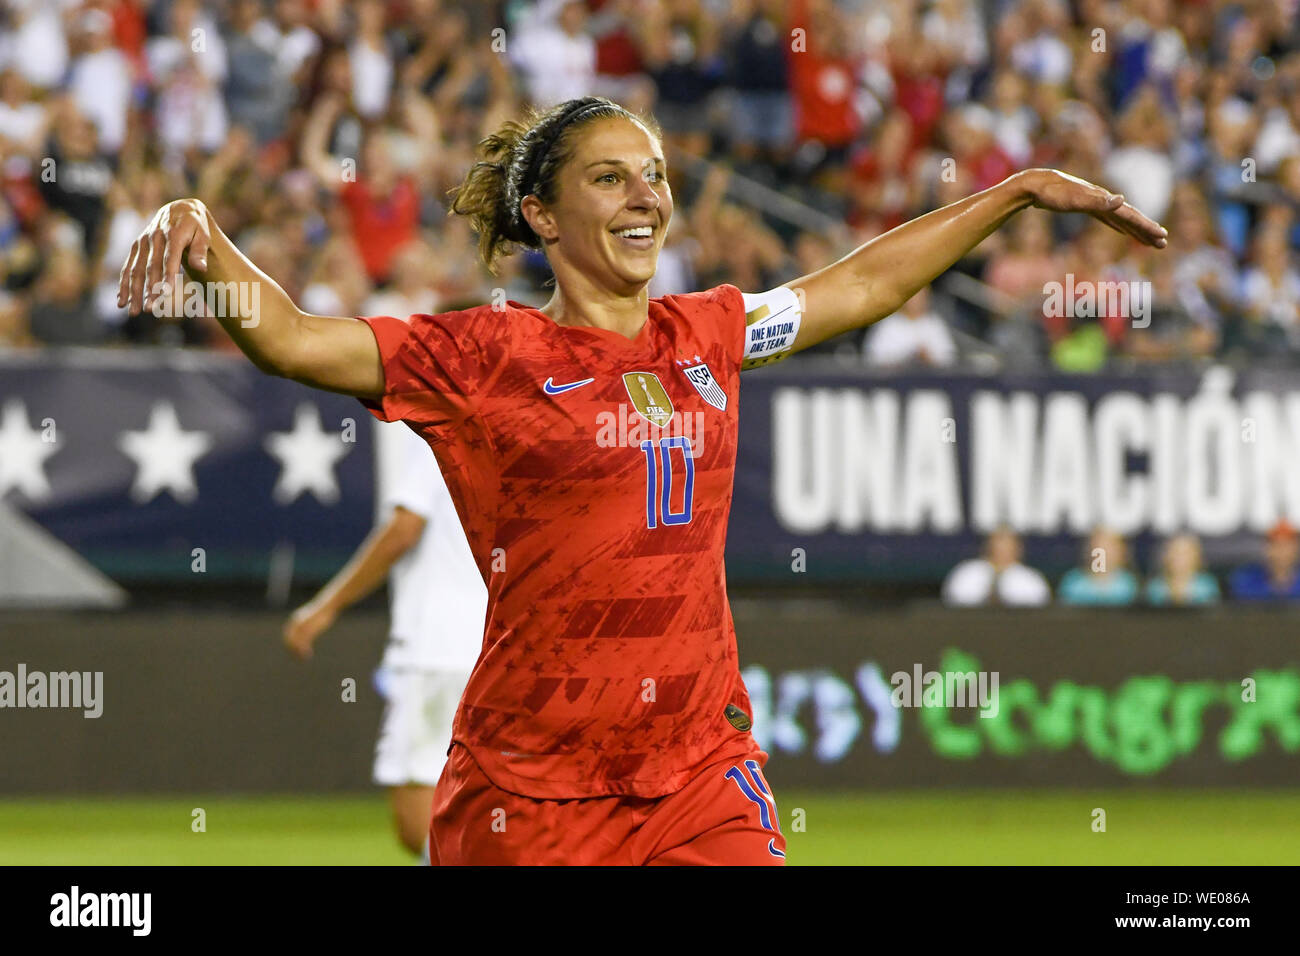 Philadelphia, United States. 29th Aug, 2019. Soccer 2019 - United States vs. Portugal | Carli Lloyd celebrates her goal as The United States Women's National Team defeated Portugal 4-0 during their World Cup victory tour. Credit: Don Mennig/Alamy Live News Stock Photo